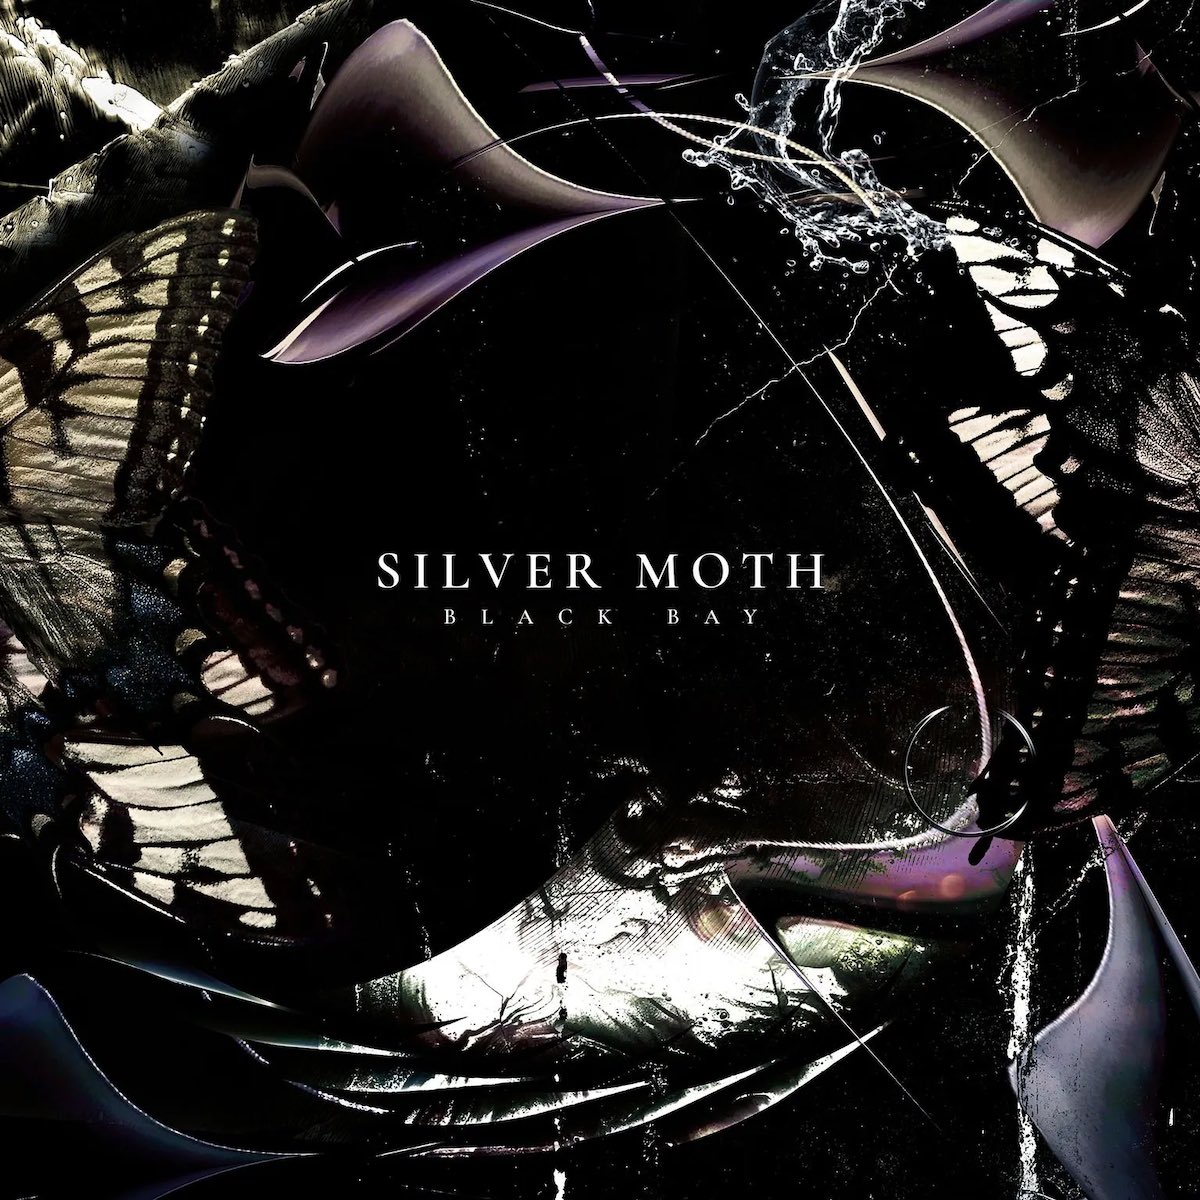 Saturday April 22nd 8pm (UK time) @SilverMothMusic will be hosting a @LlSTENlNG_PARTY for Black Bay Join us